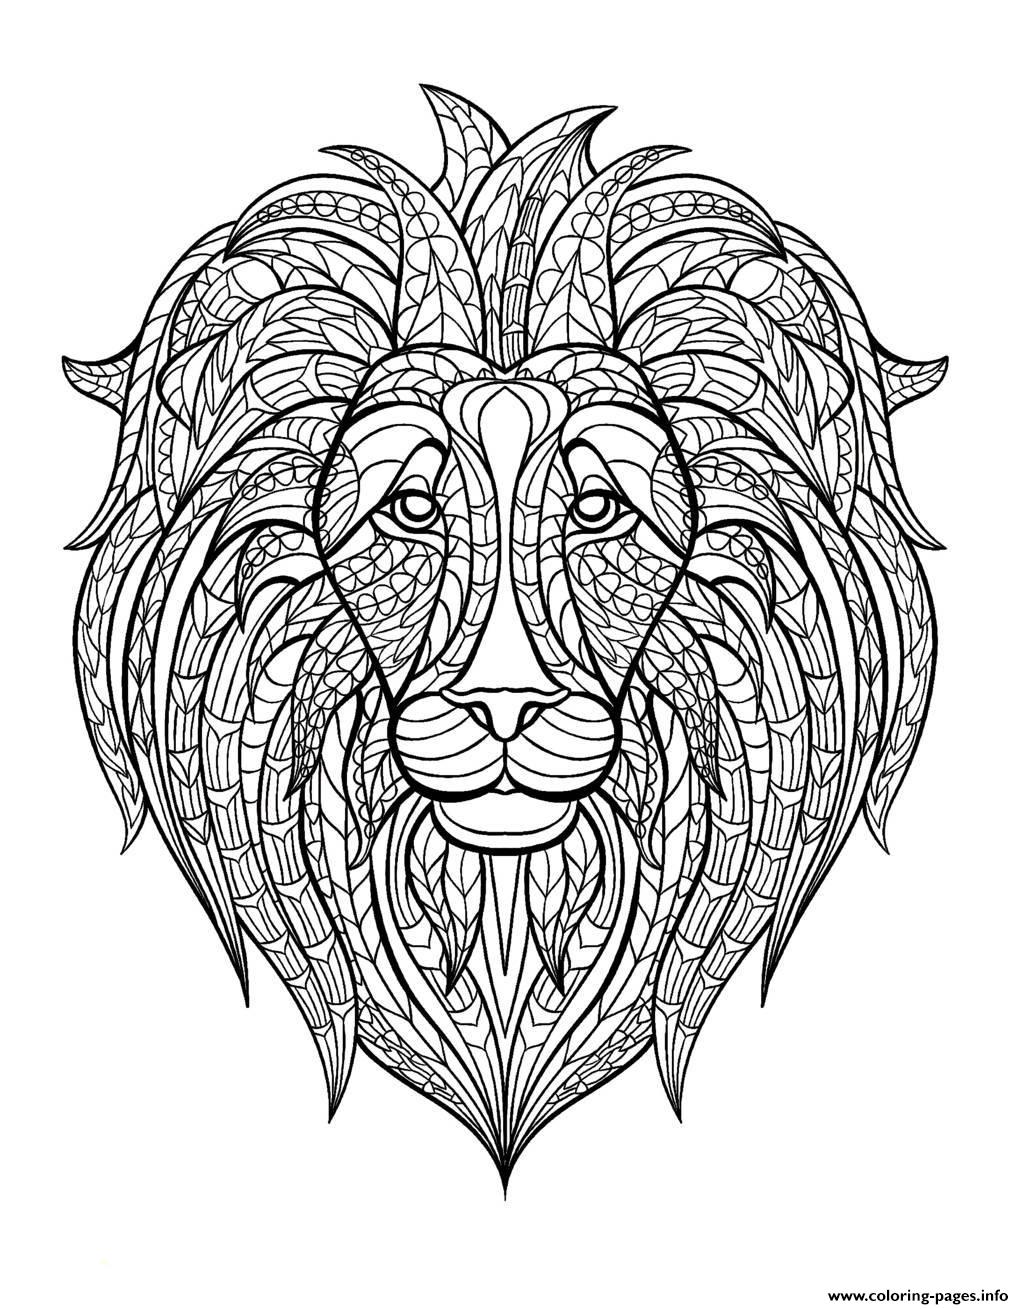 images coloring pages free - photo #20